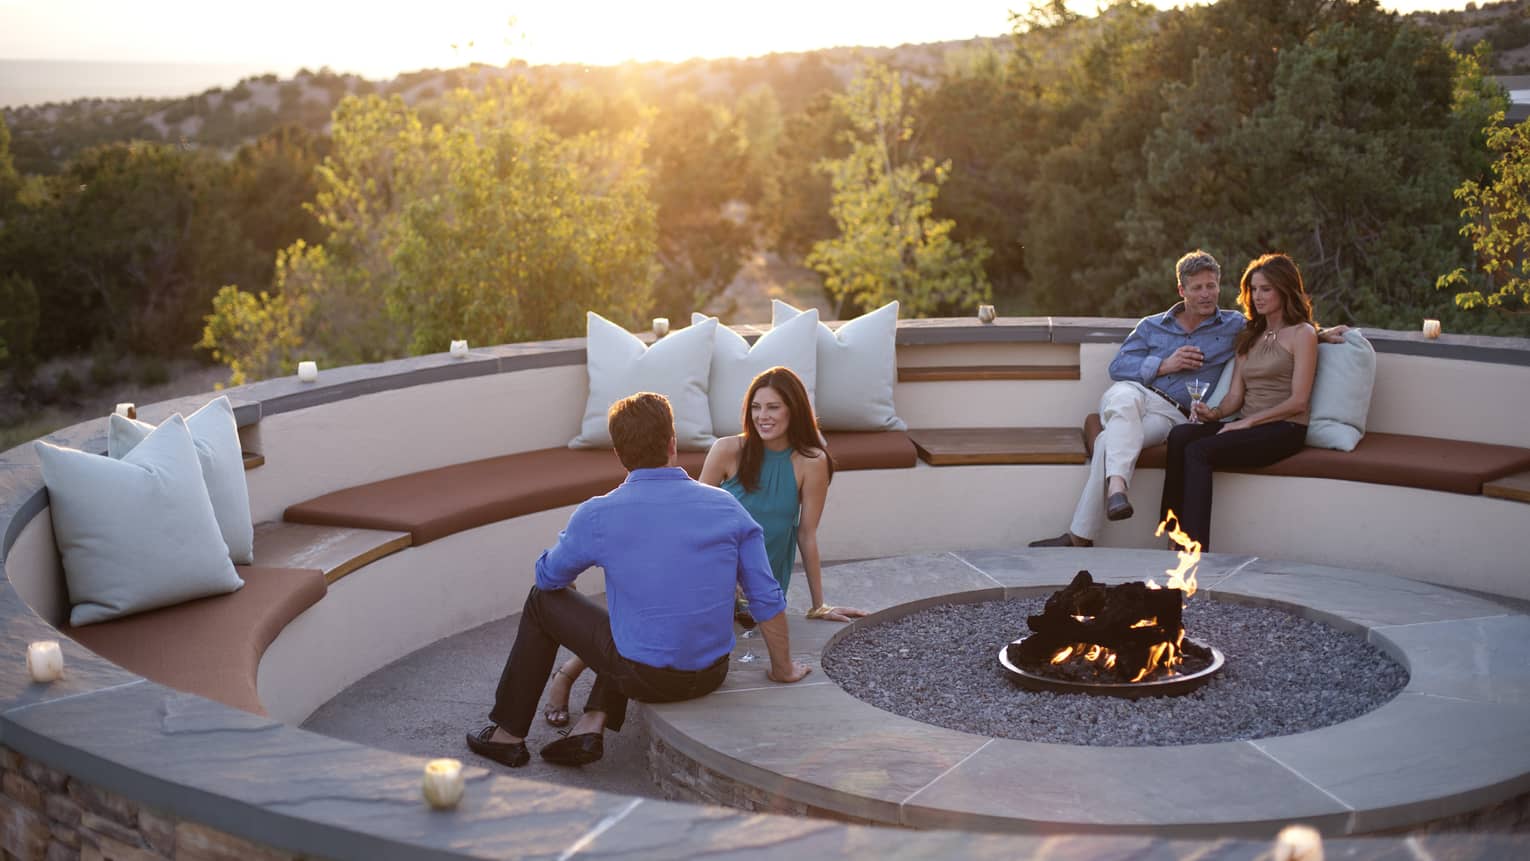 Couples sit within round, stone patio benches, modern outdoor fireplace